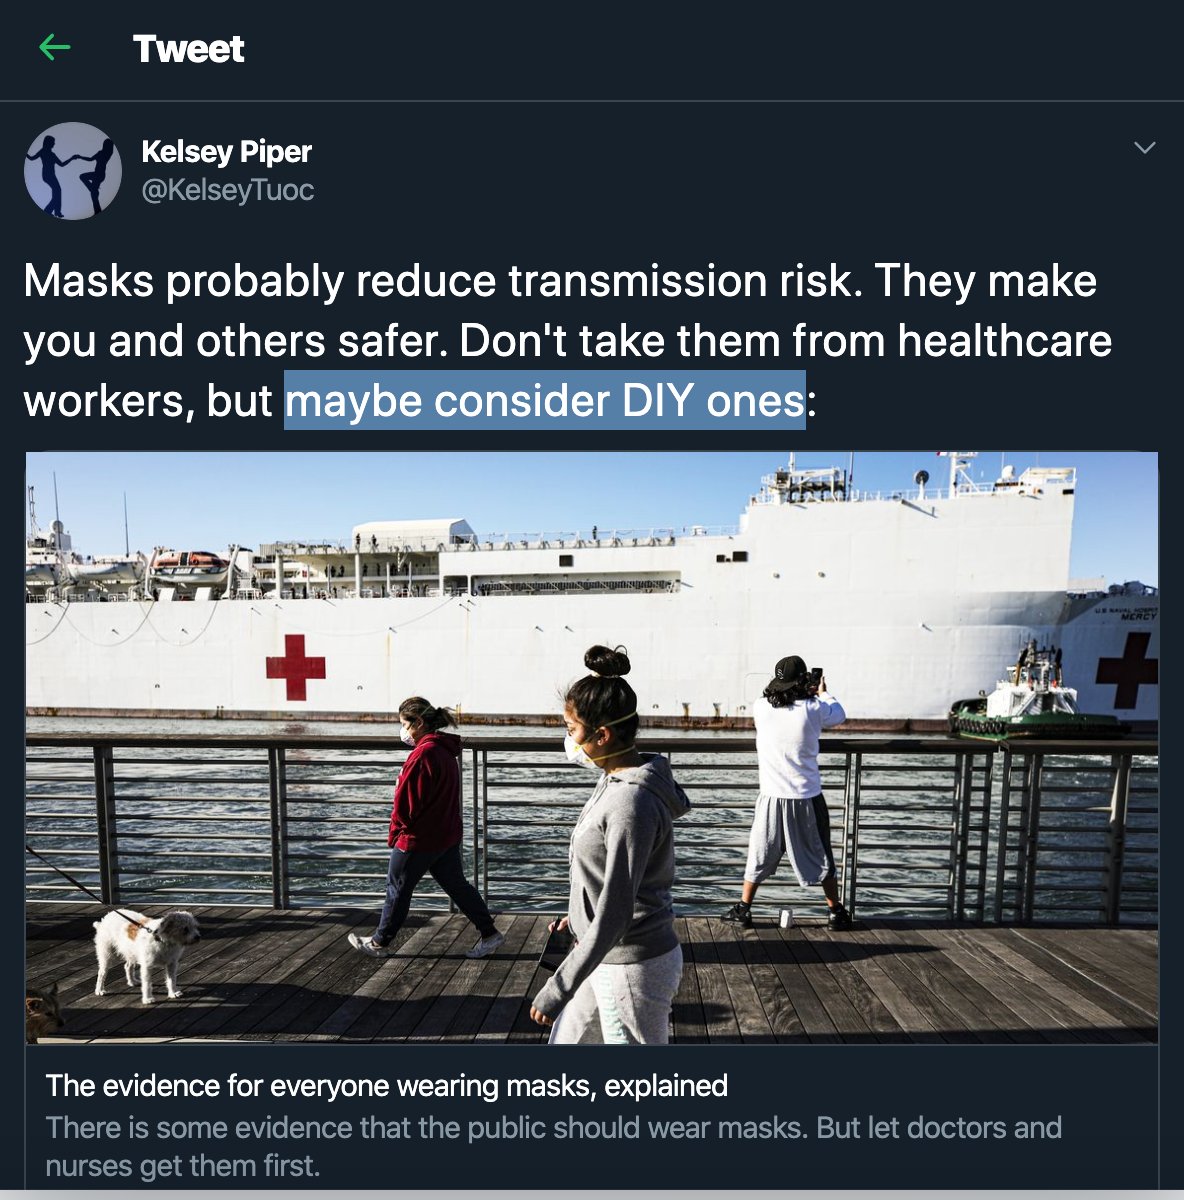 this article is half paragraphs of both-side-ism relaying establishment concerns about people being too dumb to wear masks effectively  https://www.vox.com/2020/3/31/21198132/coronavirus-covid-face-masks-n95-respirator-ppe-shortagethe world "could" appears 19 times, "will" appears 6, and "homemade" twiceyep that's ~effective~ altruism for ya